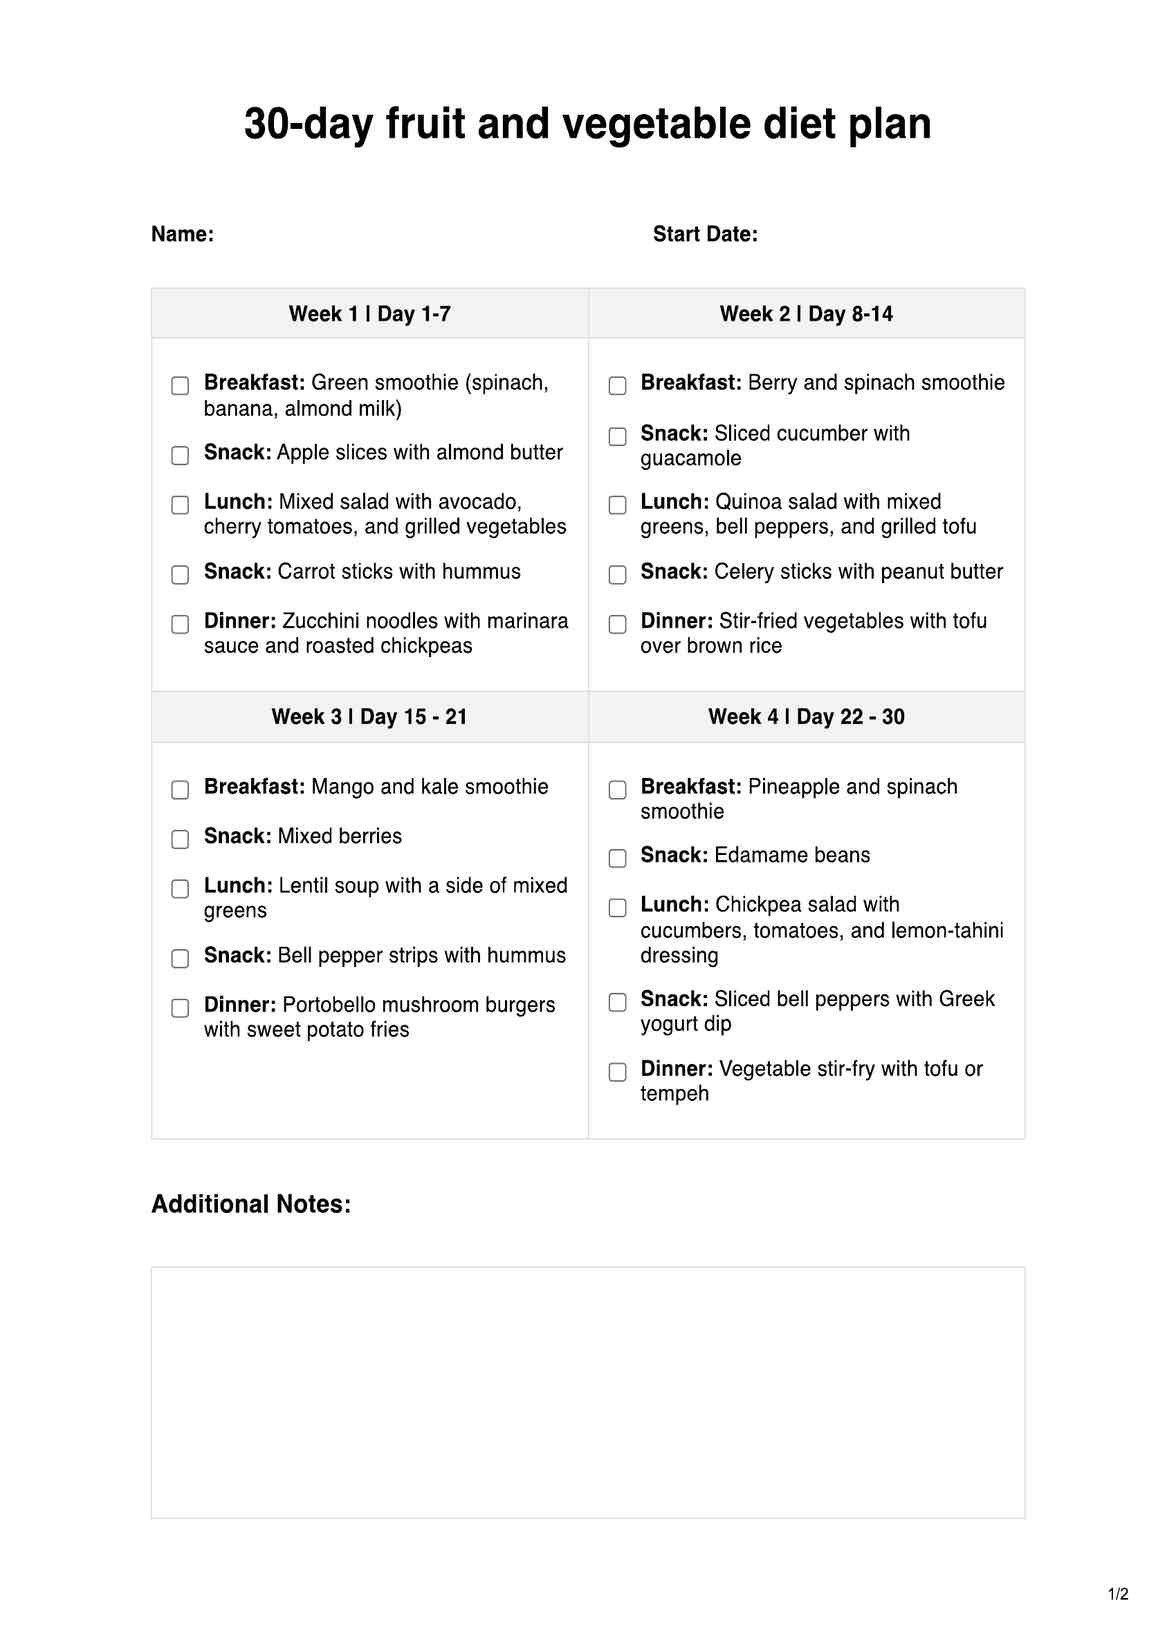 30-Day Fruit and Vegetable Diet Plan PDF Example